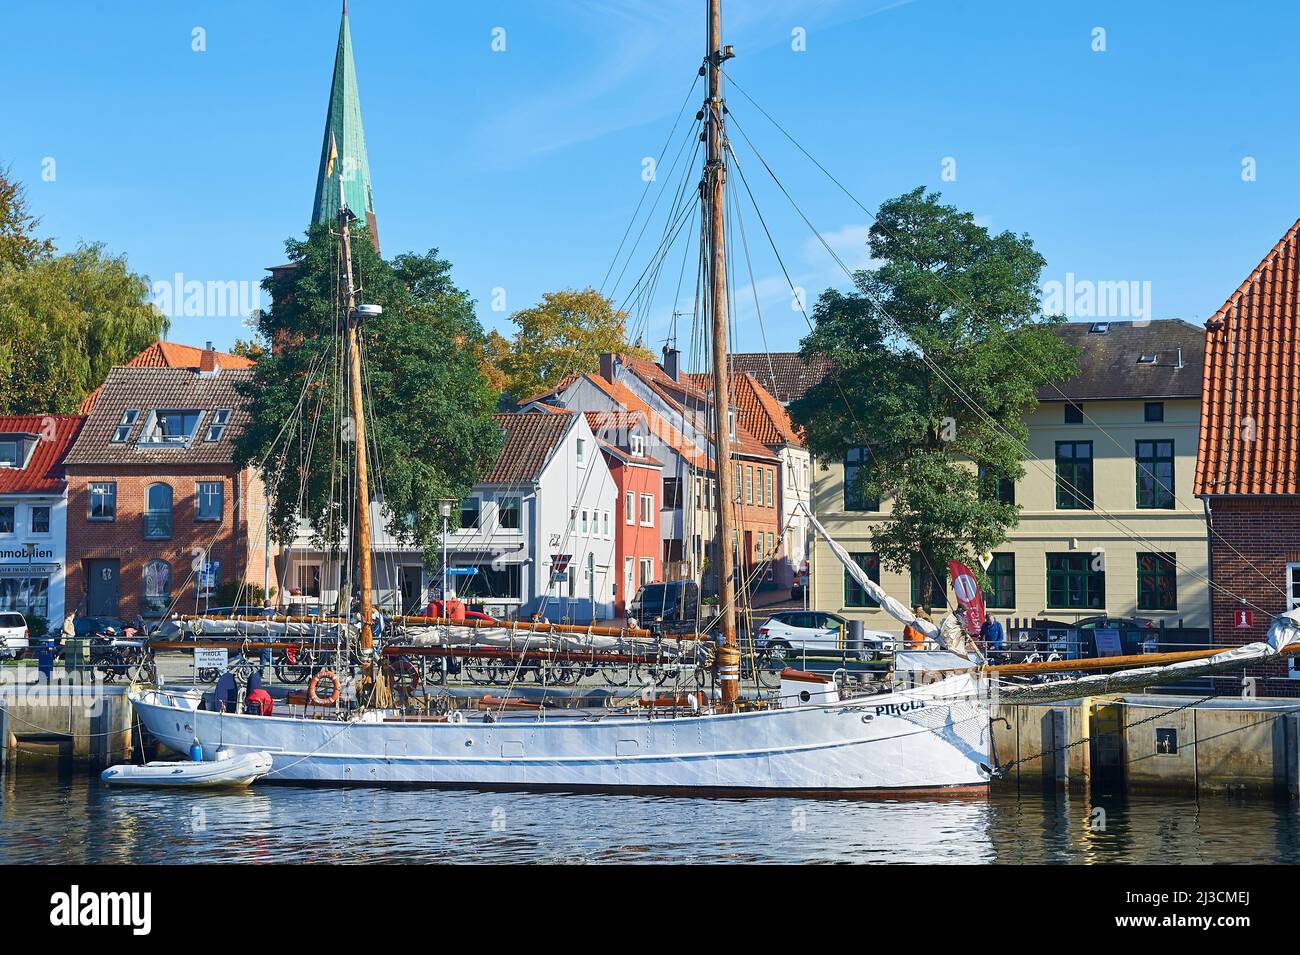 Two masted sailing ship in the harbour of Neustadt, Northern Germany Stock Photo